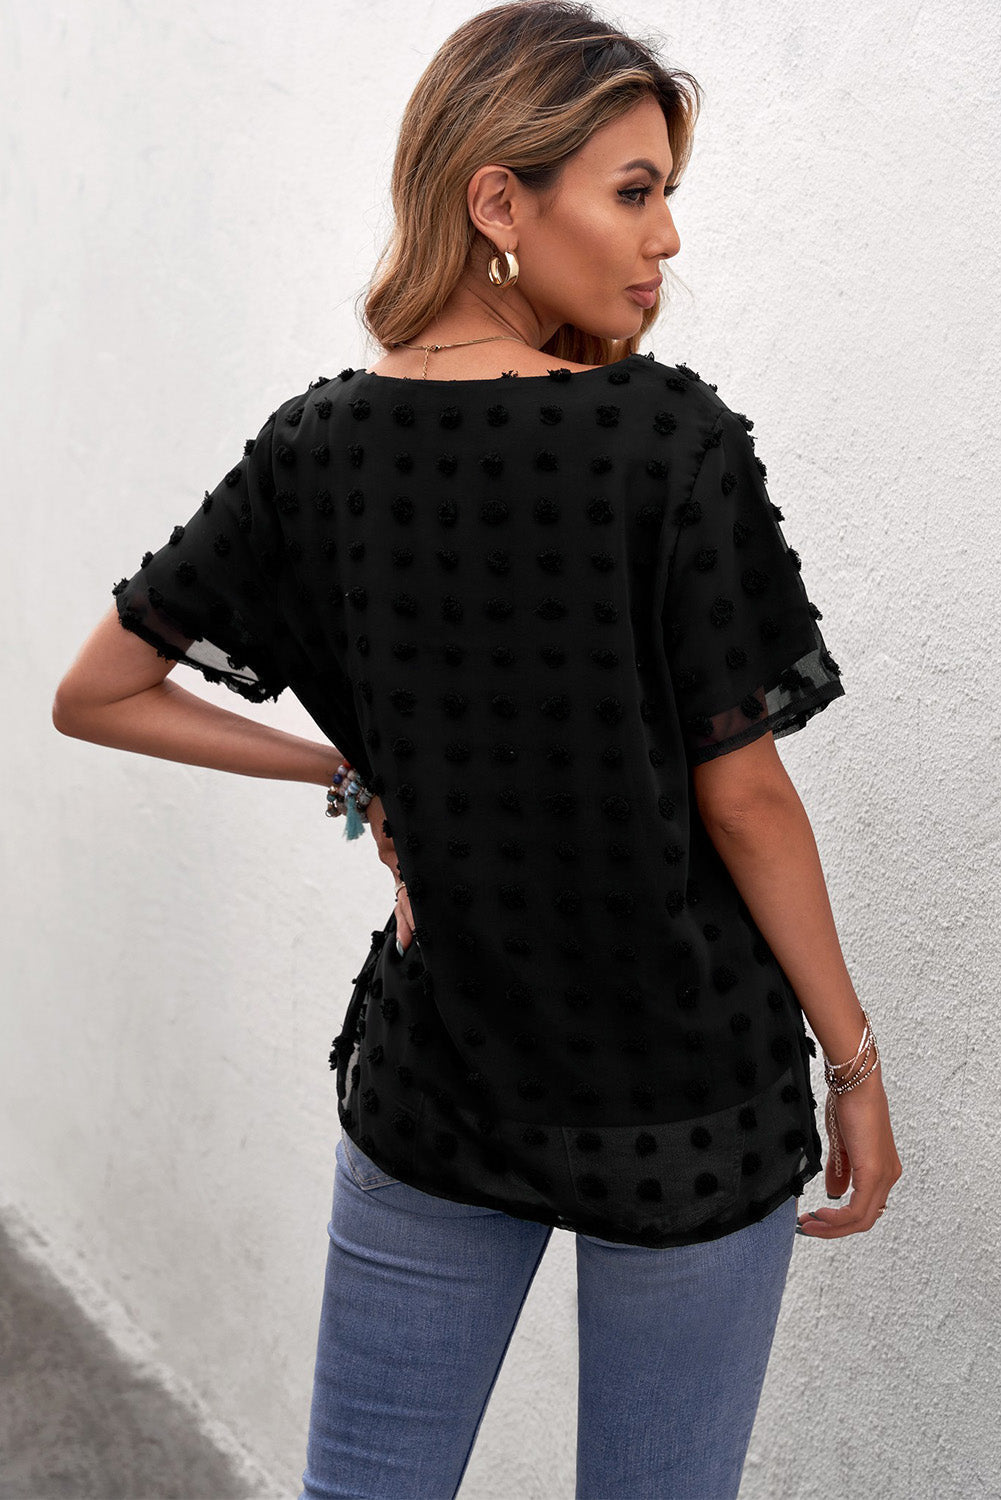 Women's Casual Summer Crew Neck Tops Swiss Dot Solid Color Blouses Loose Fit Shirts Sai Feel